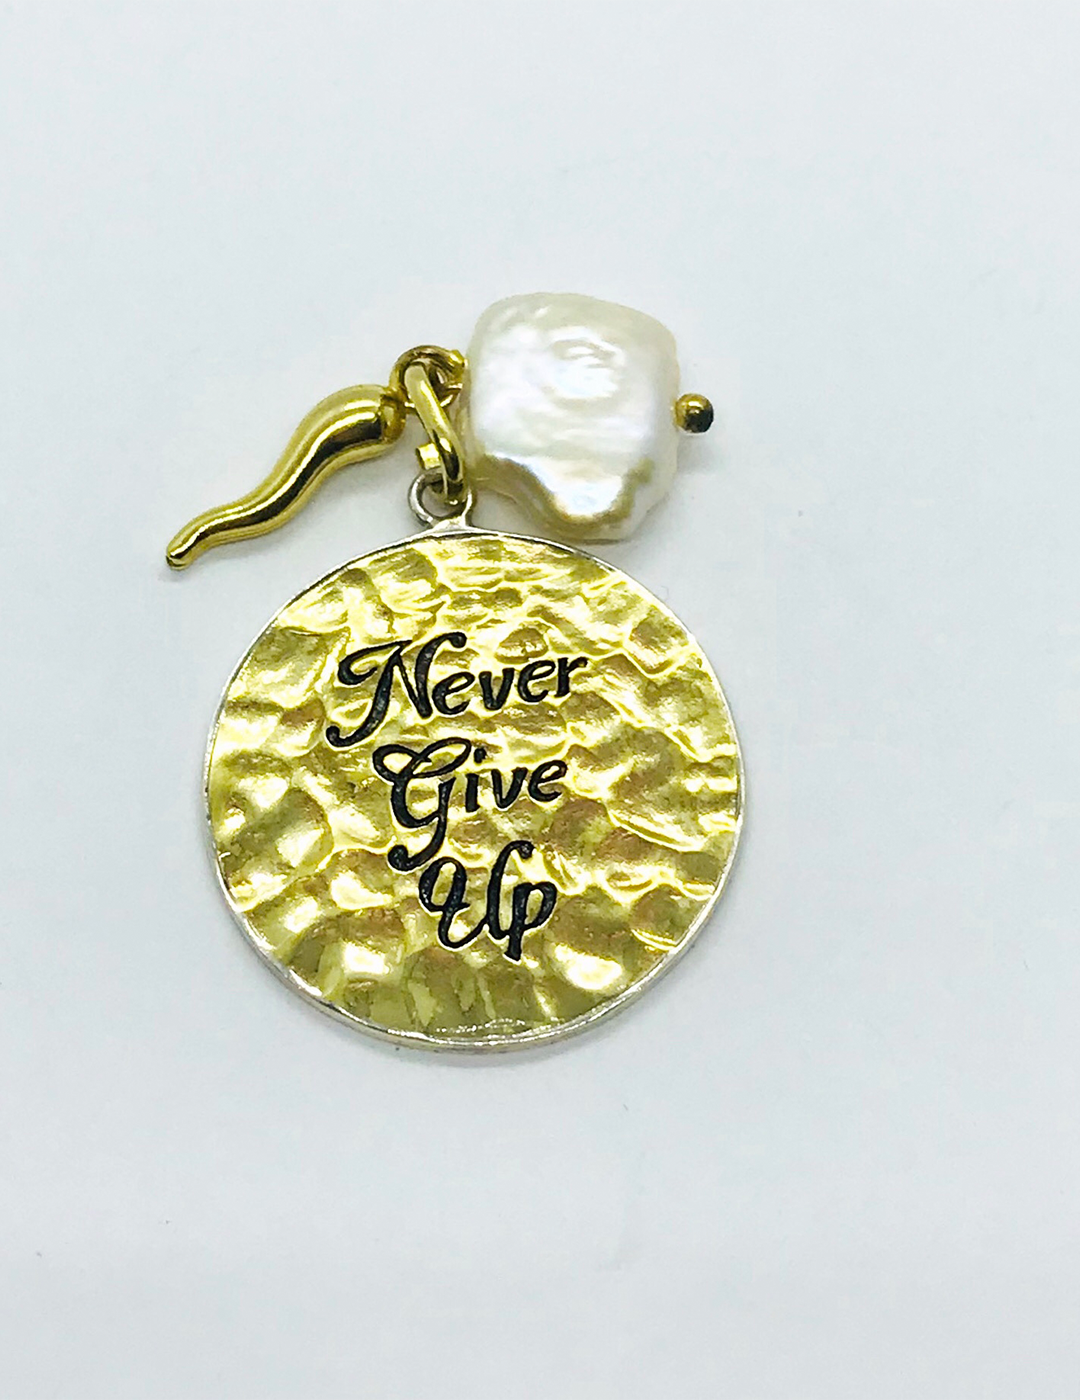 Never Give Up Charm (Charm on its own with pearl and trinket)